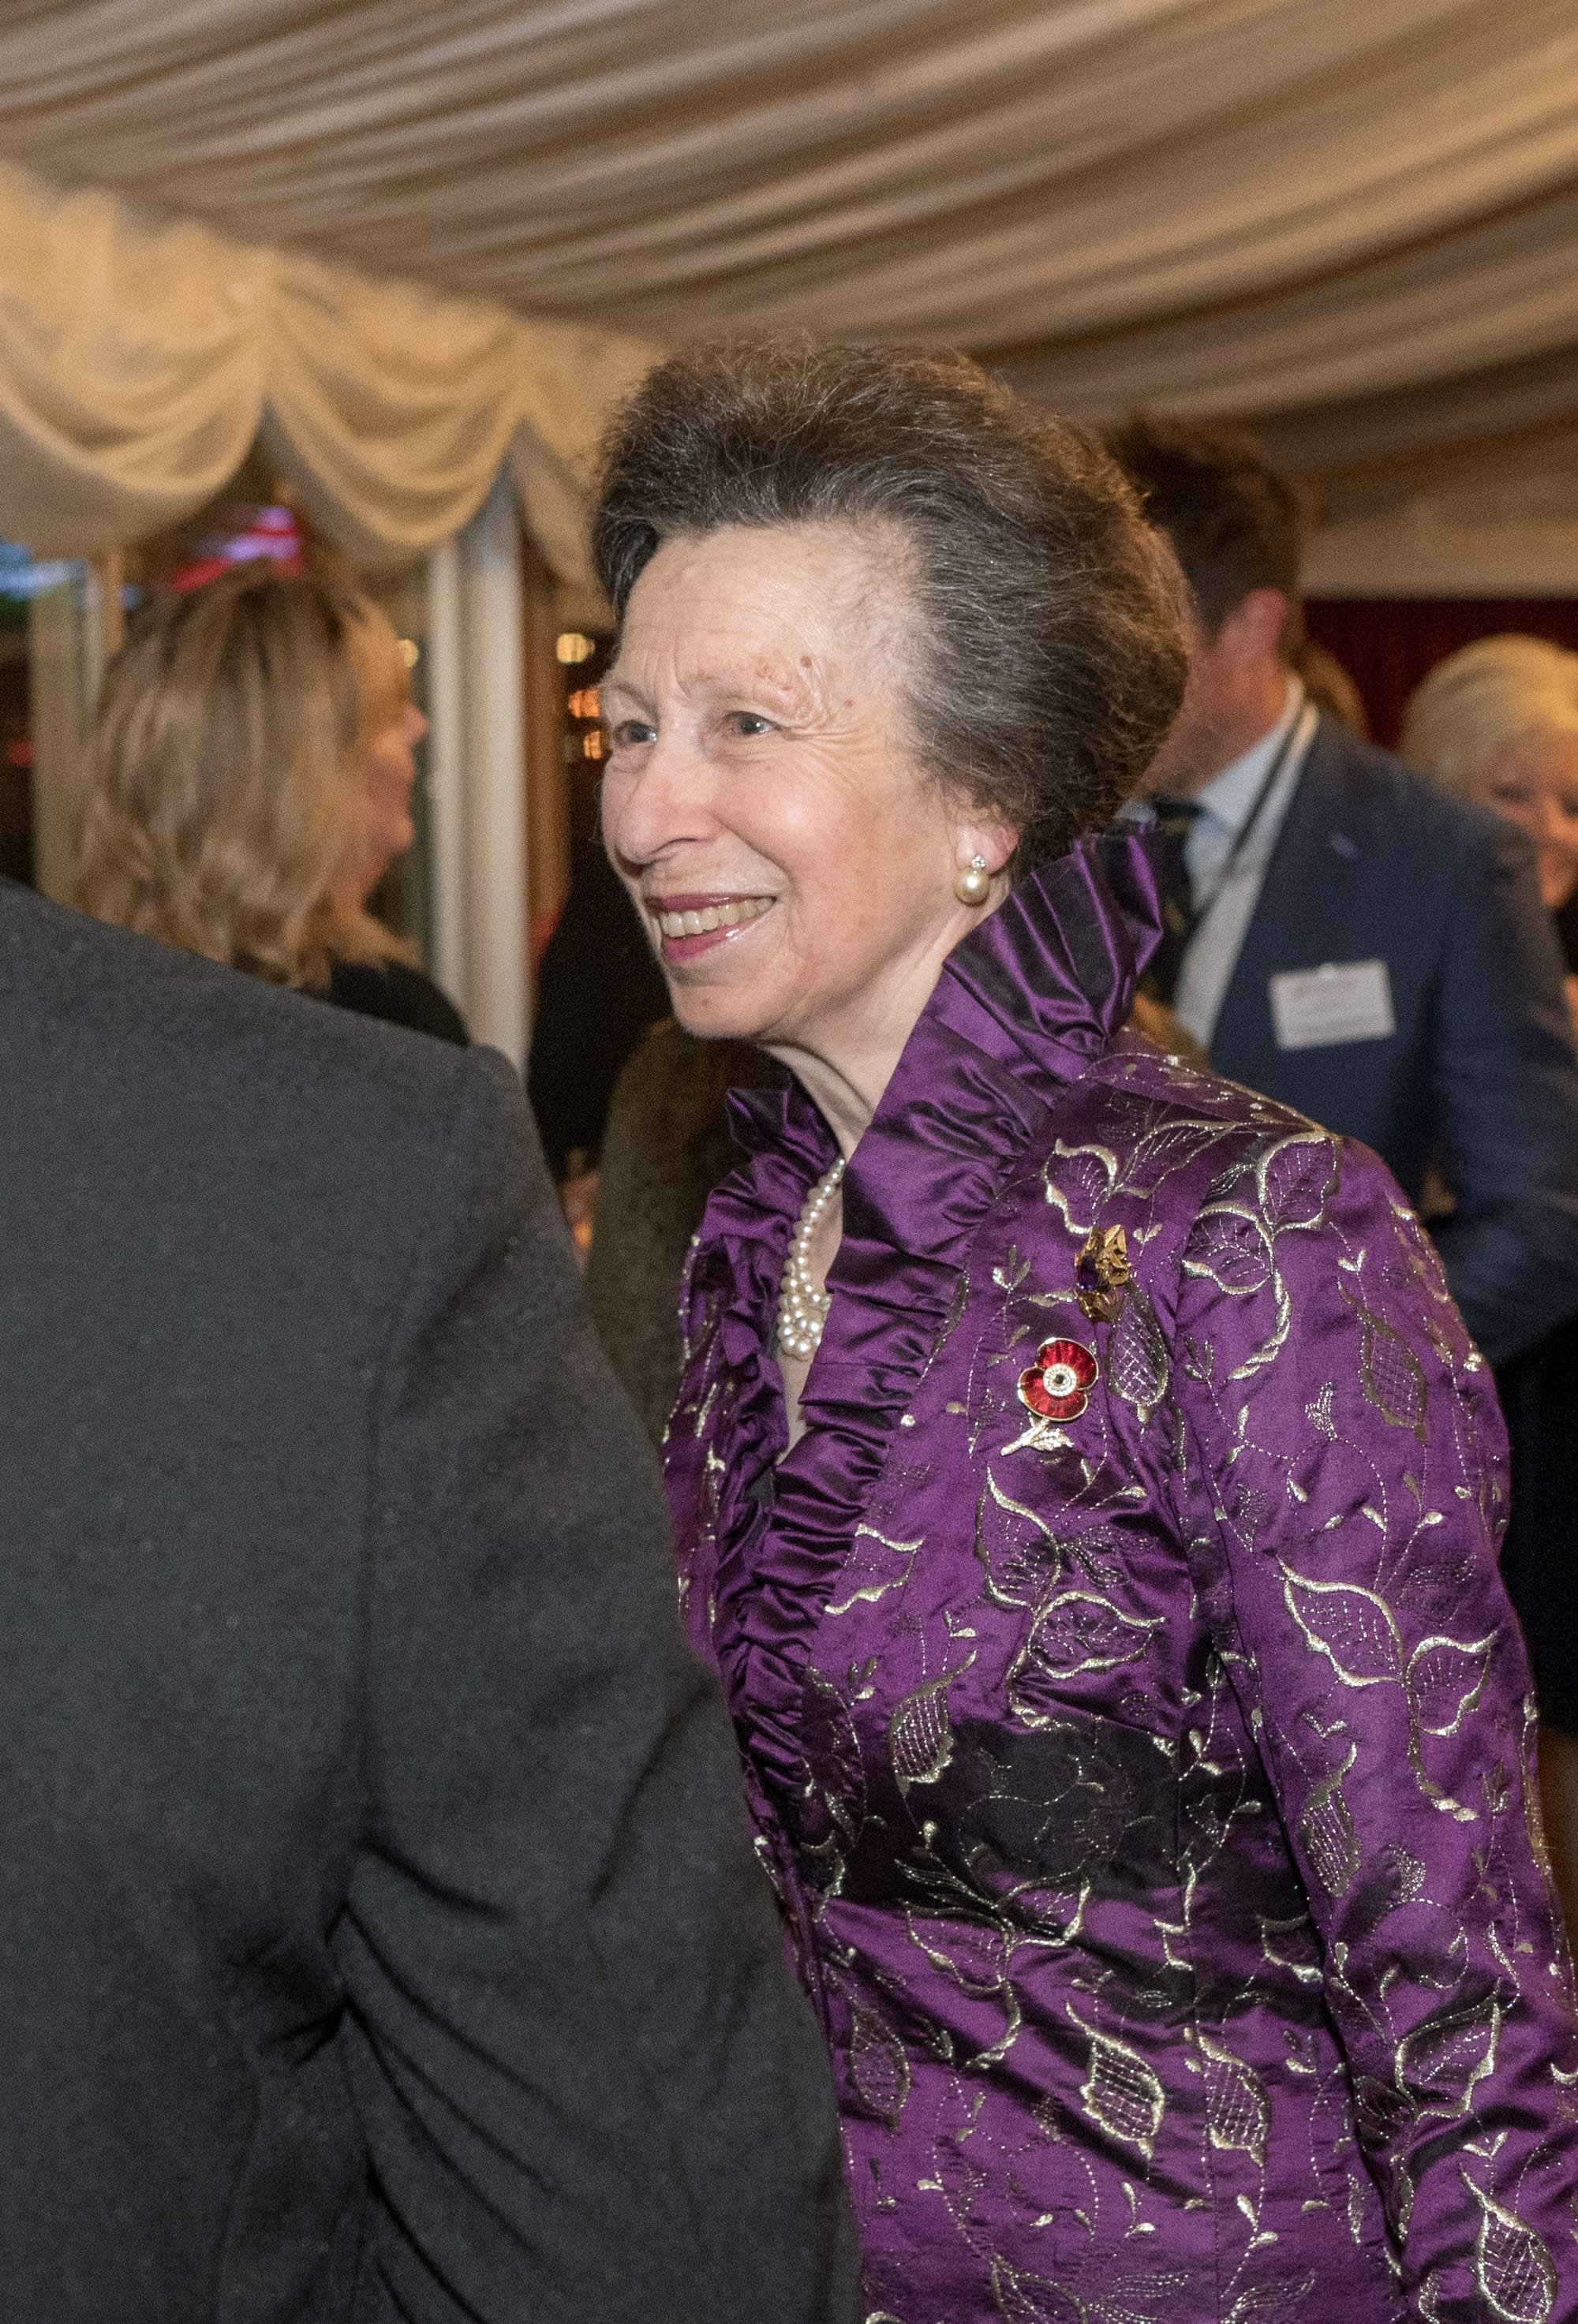 The 40th Anniversary of Wooden Spoon with HRH Princess Royal